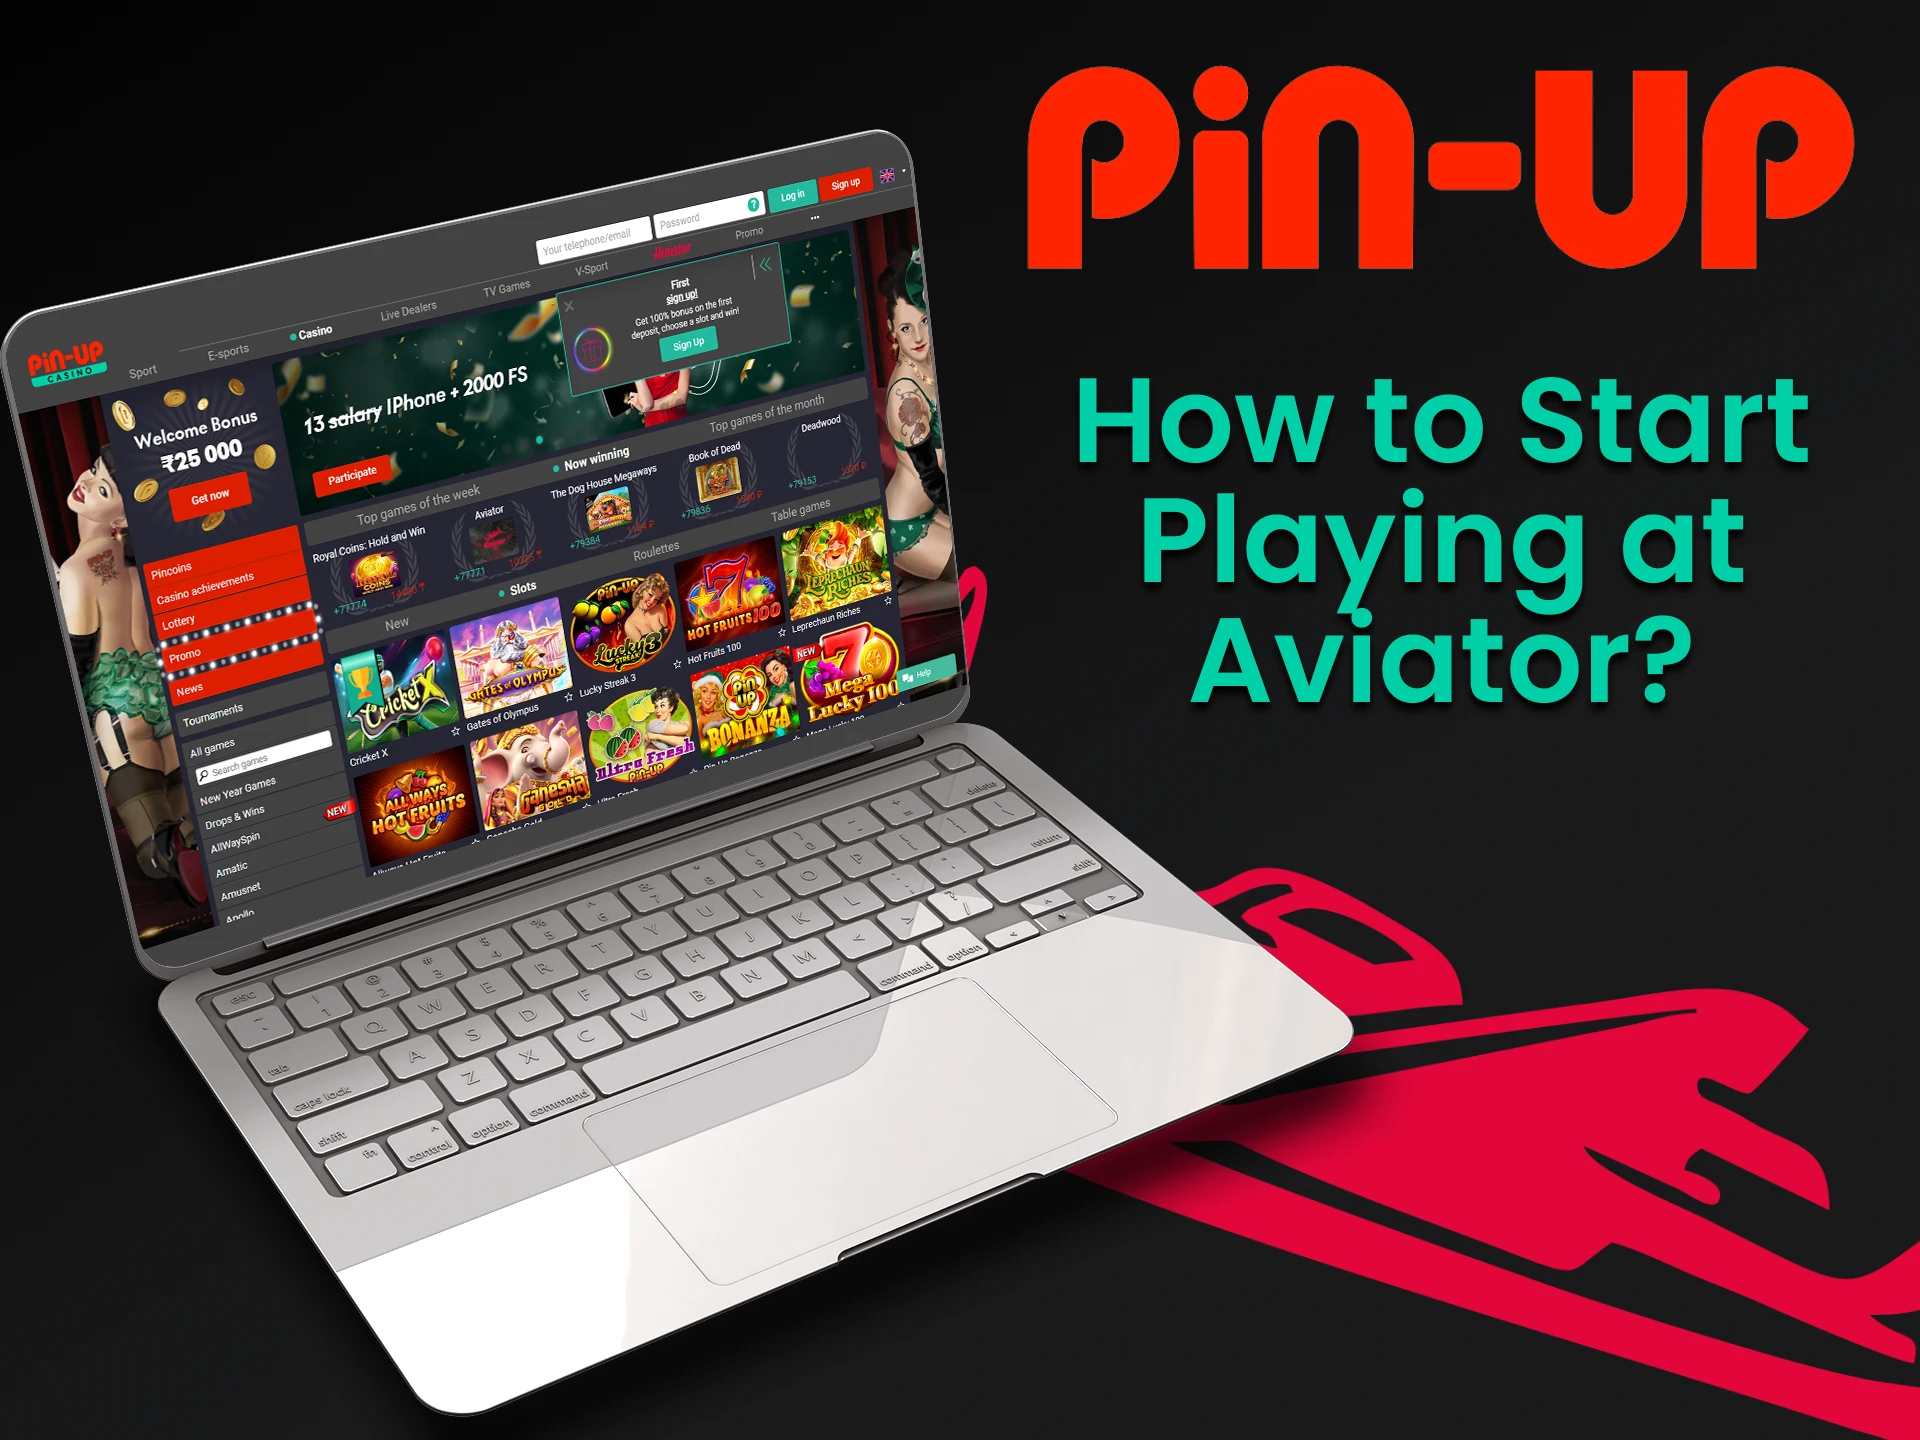 Follow a couple of simple steps to start playing Aviator and Pin Up.